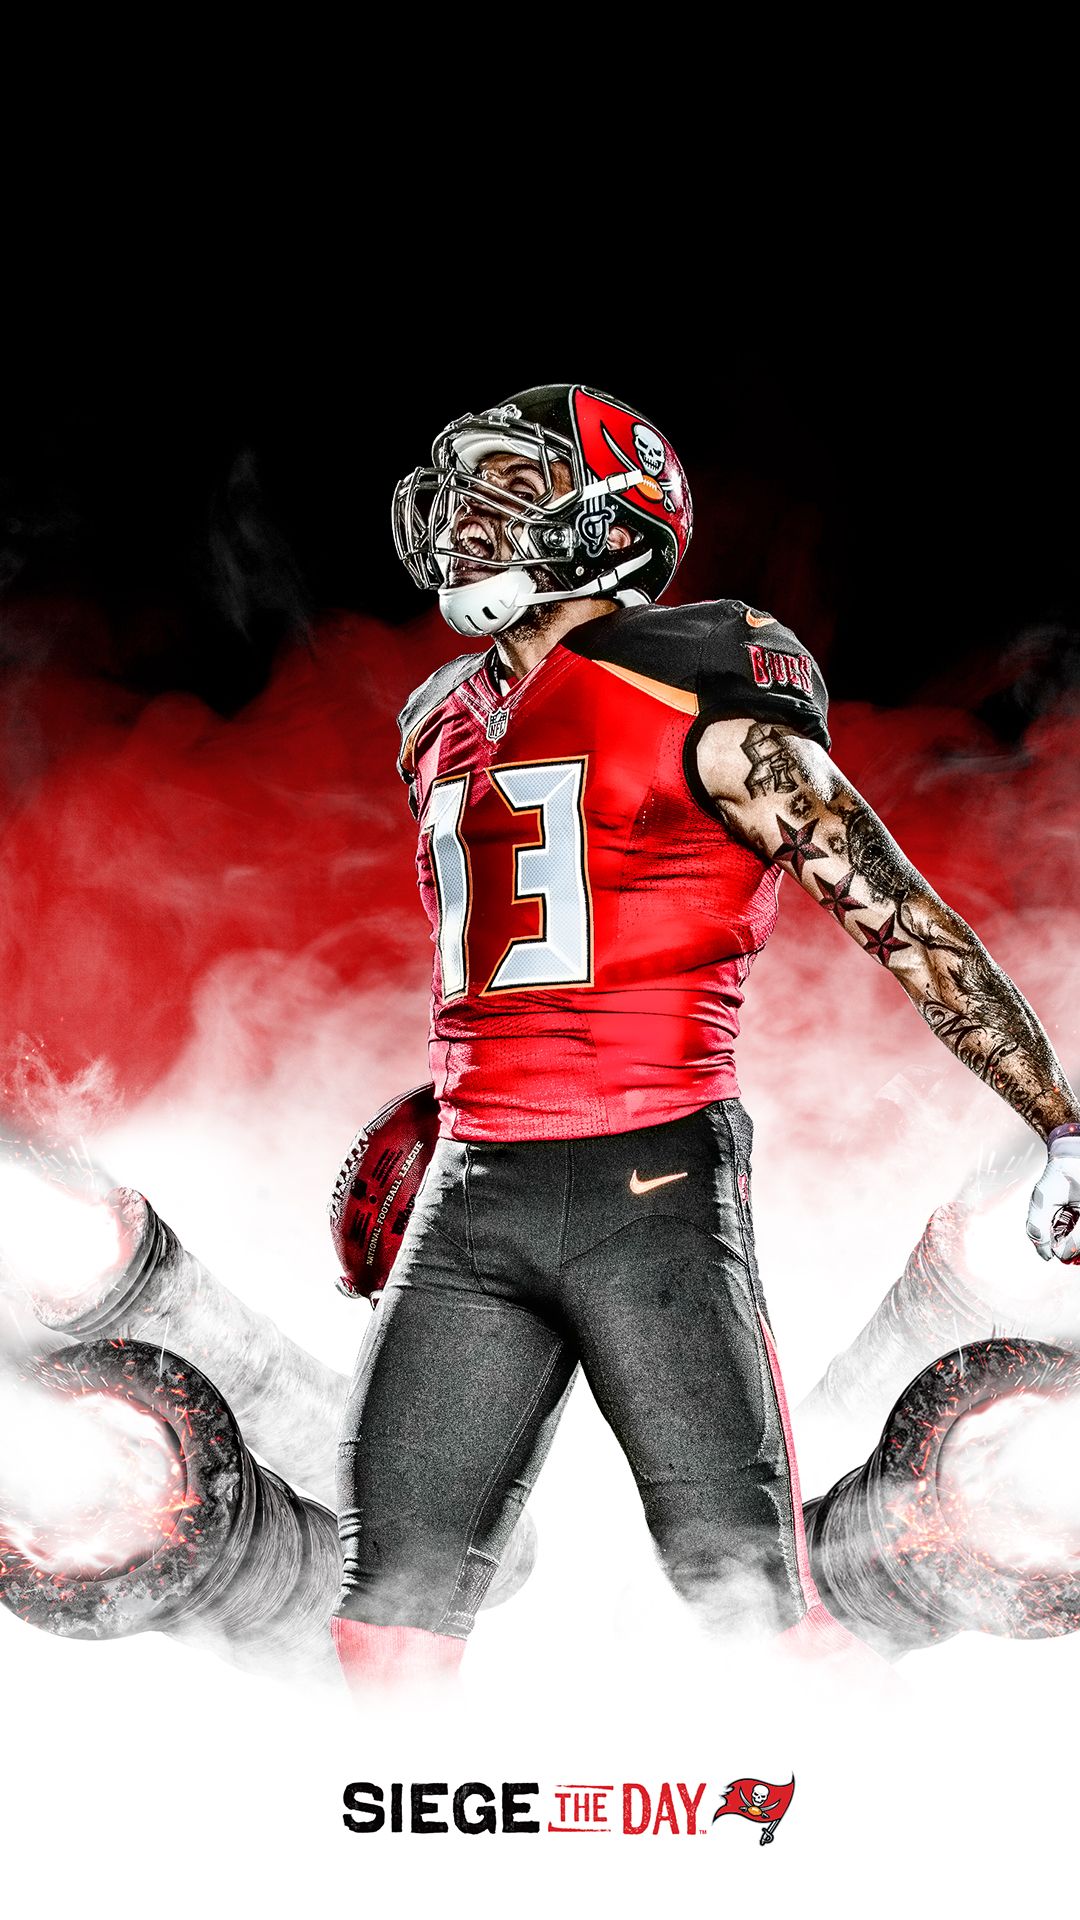 Tampa Bay Buccaneers Wallpapers 52 pictures